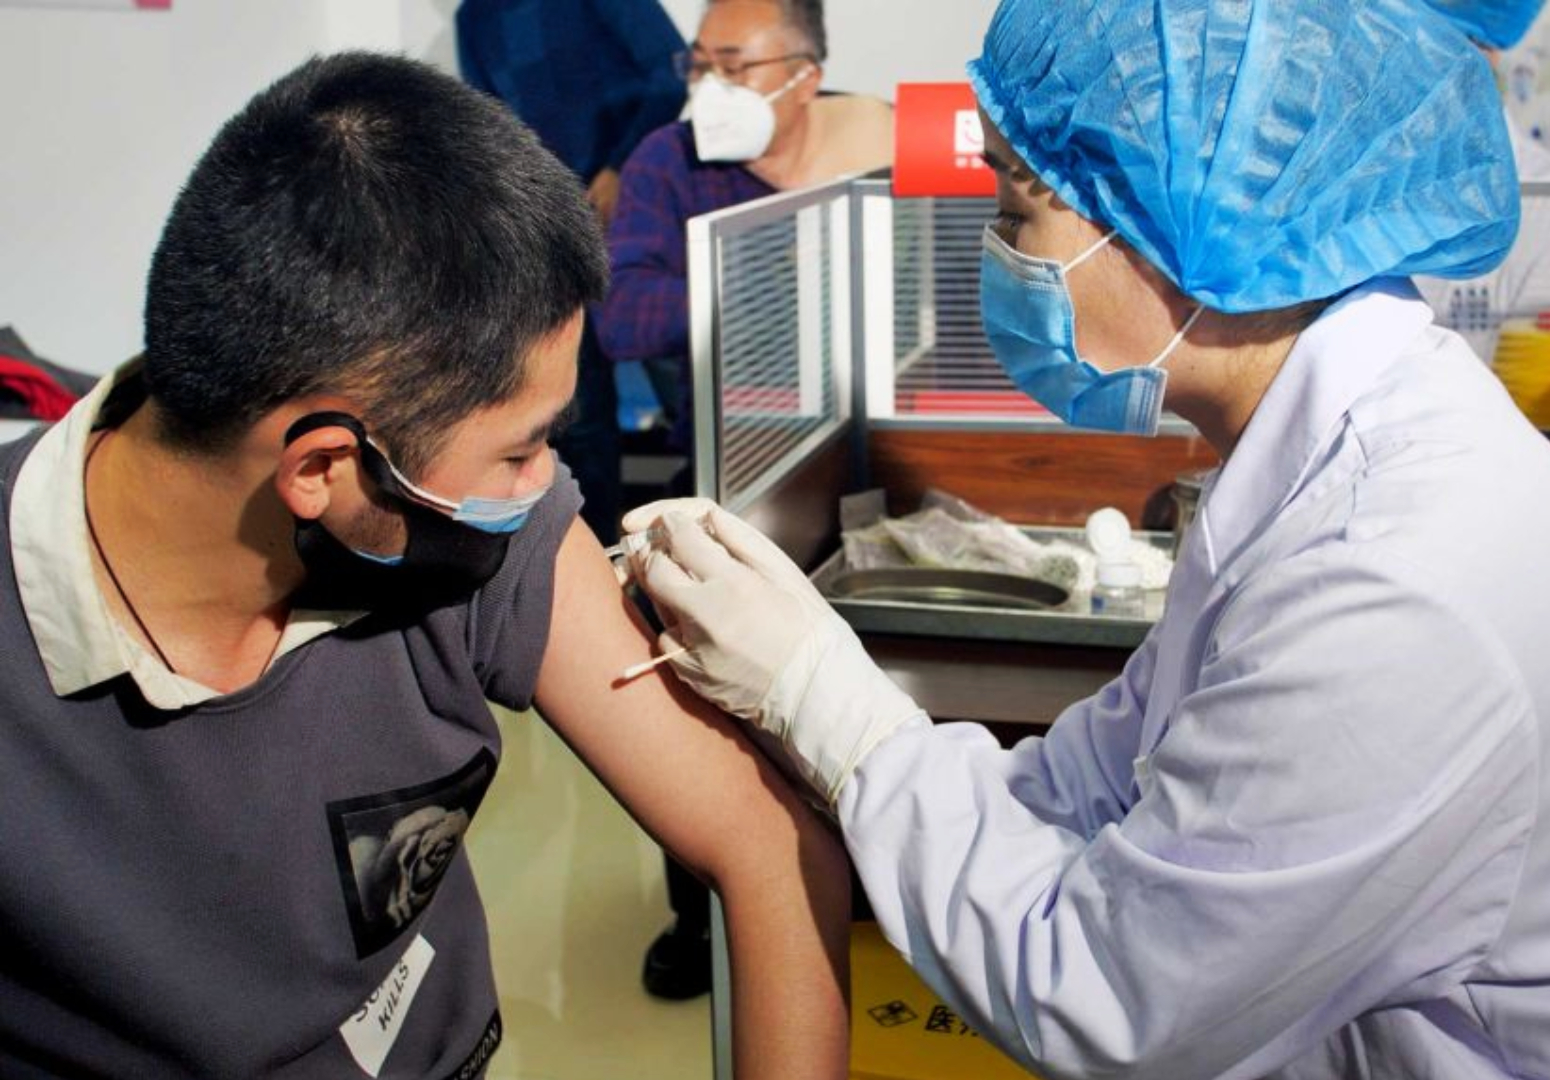 China Gives Unproven Corona Vaccines To Public With Secrecy Agreement